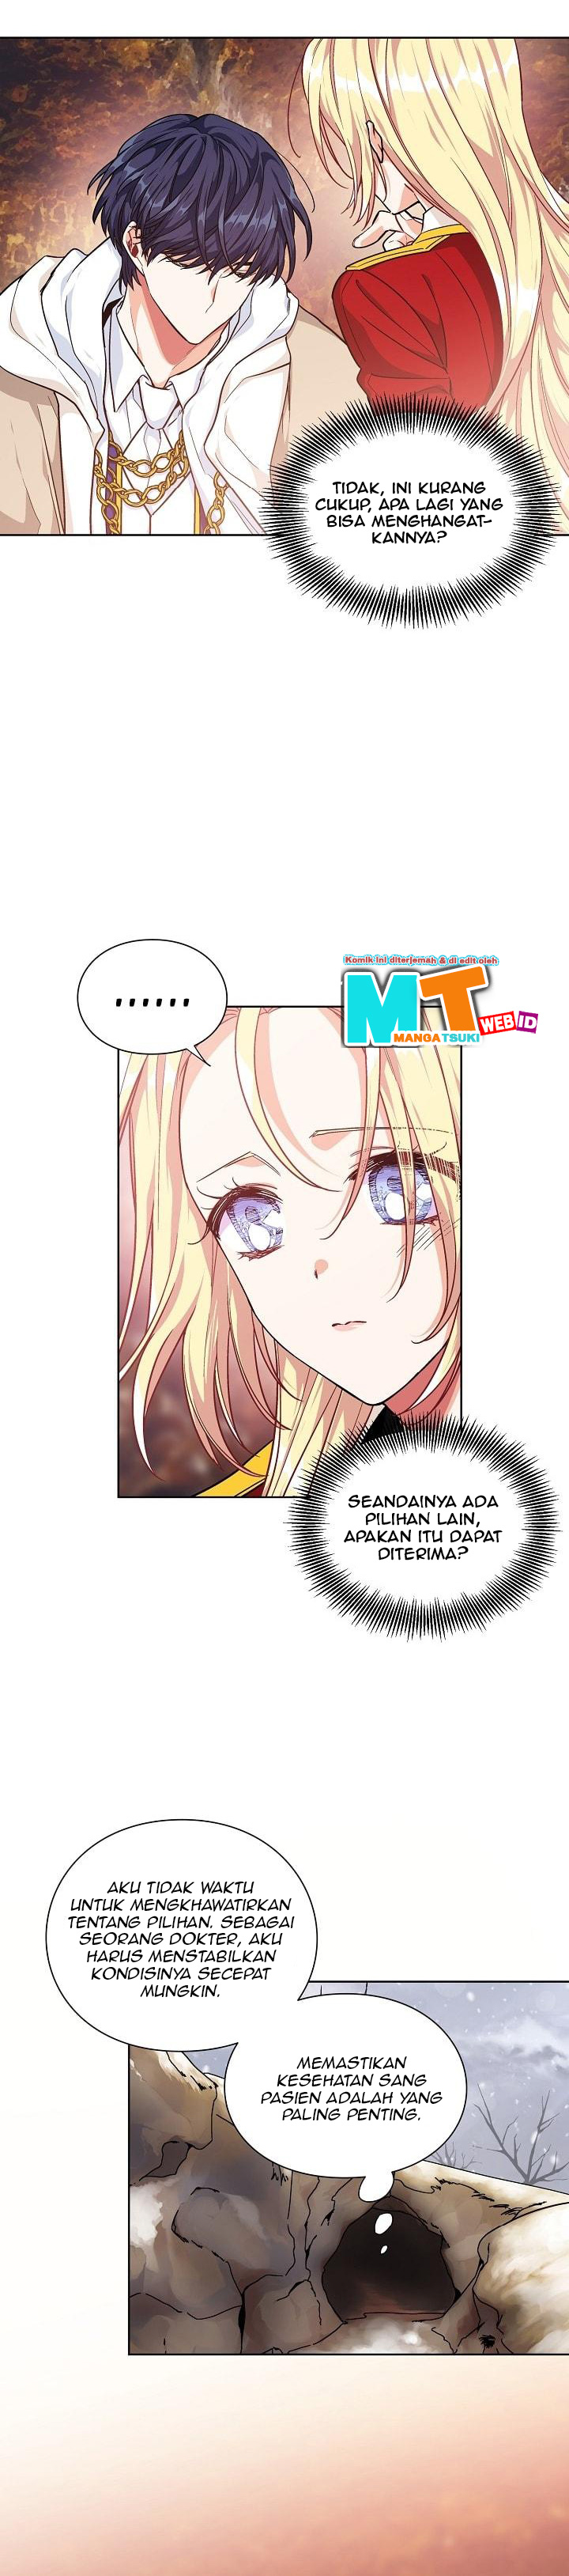 Doctor Elise: The Royal Lady With the Lamp Chapter 82